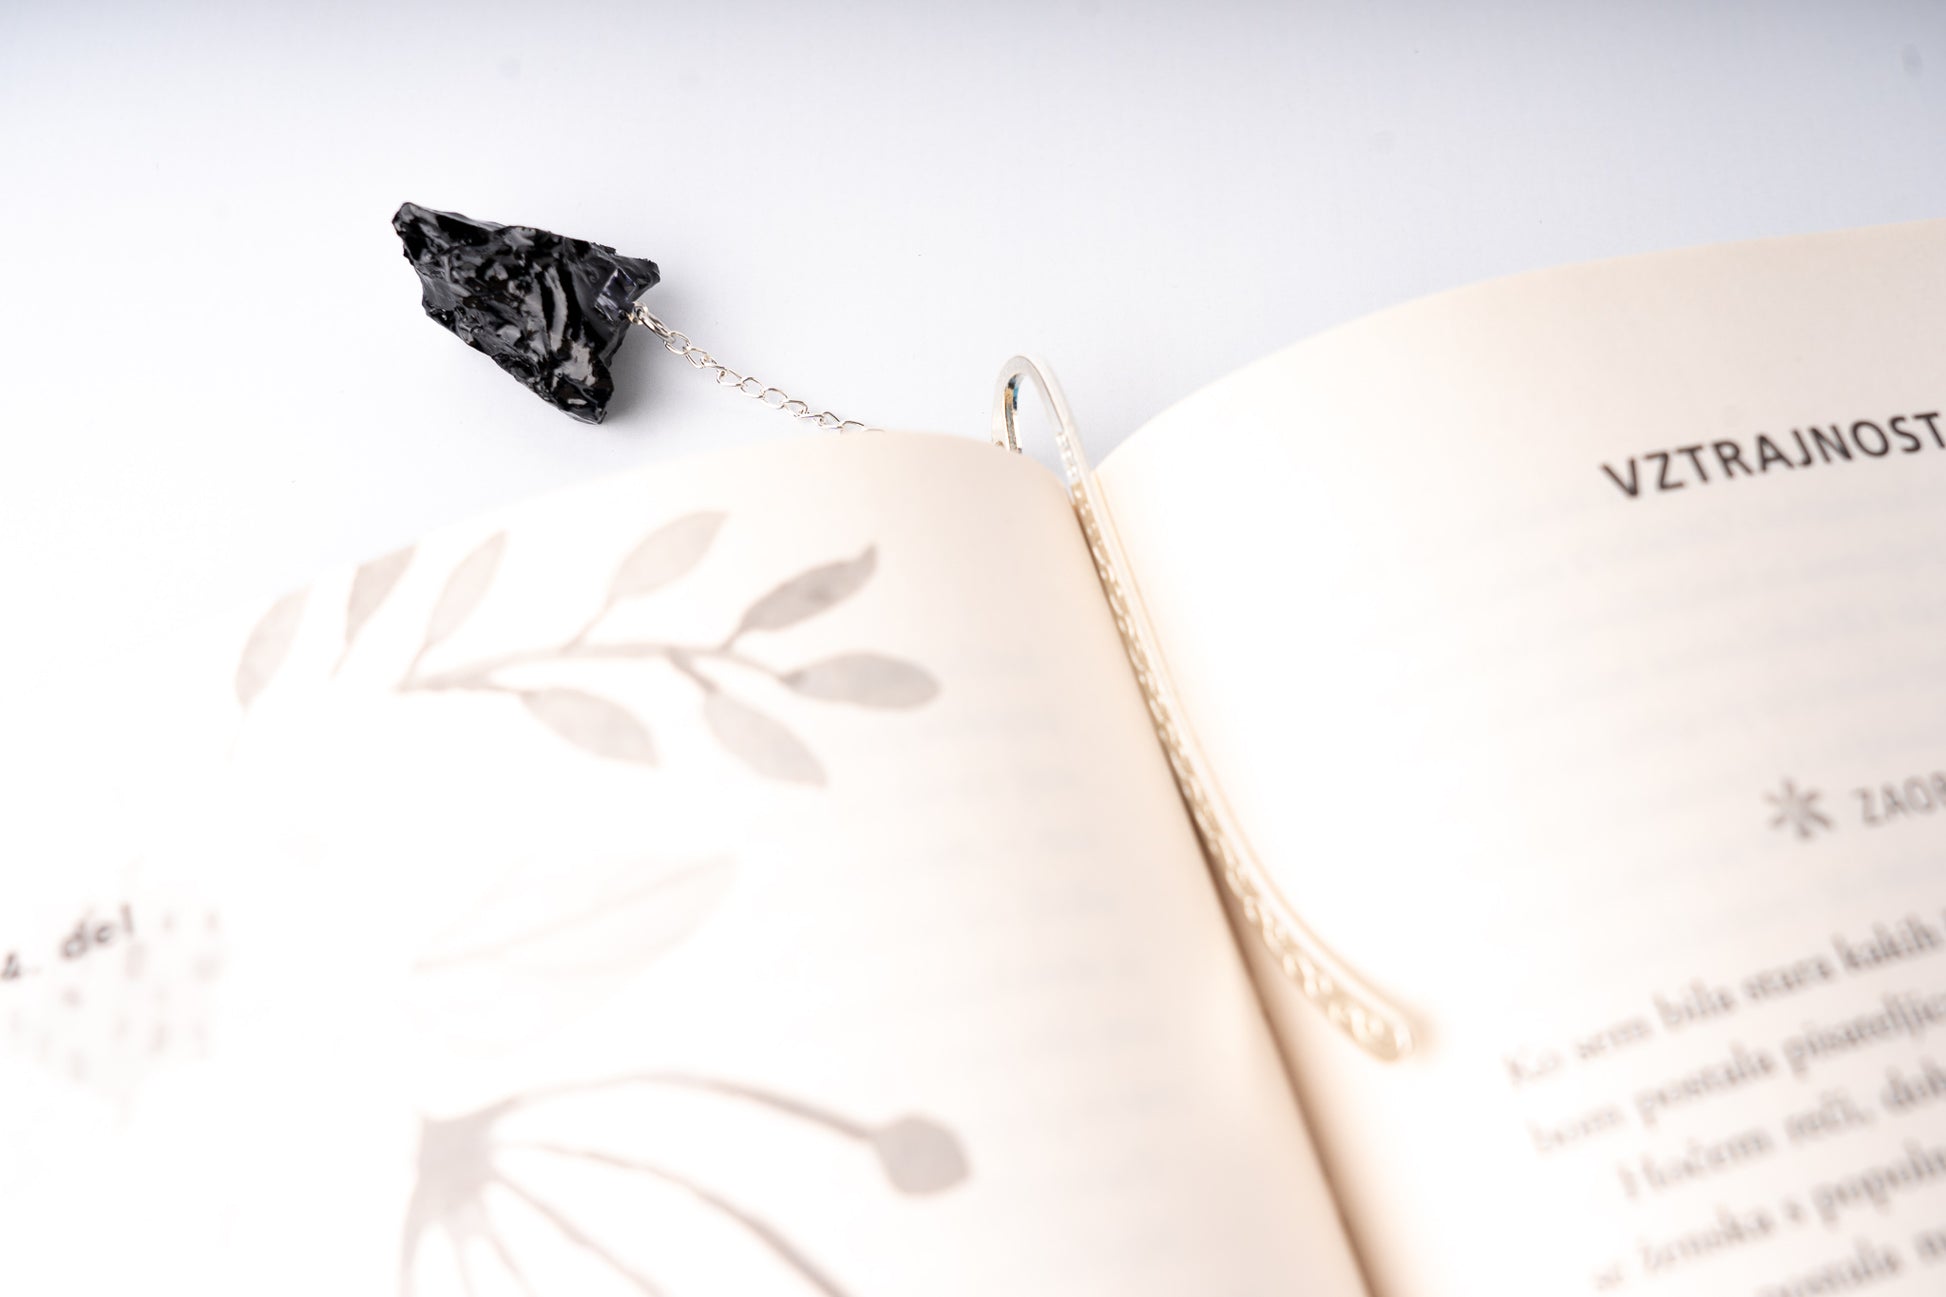 True book lovers will appreciate the 20 million-year-old fossil, which reminds them of all the stories it carries with it. Packed in gift packaging with the added description of the coal story. You can choose between black, gold silver, or rose gold version.